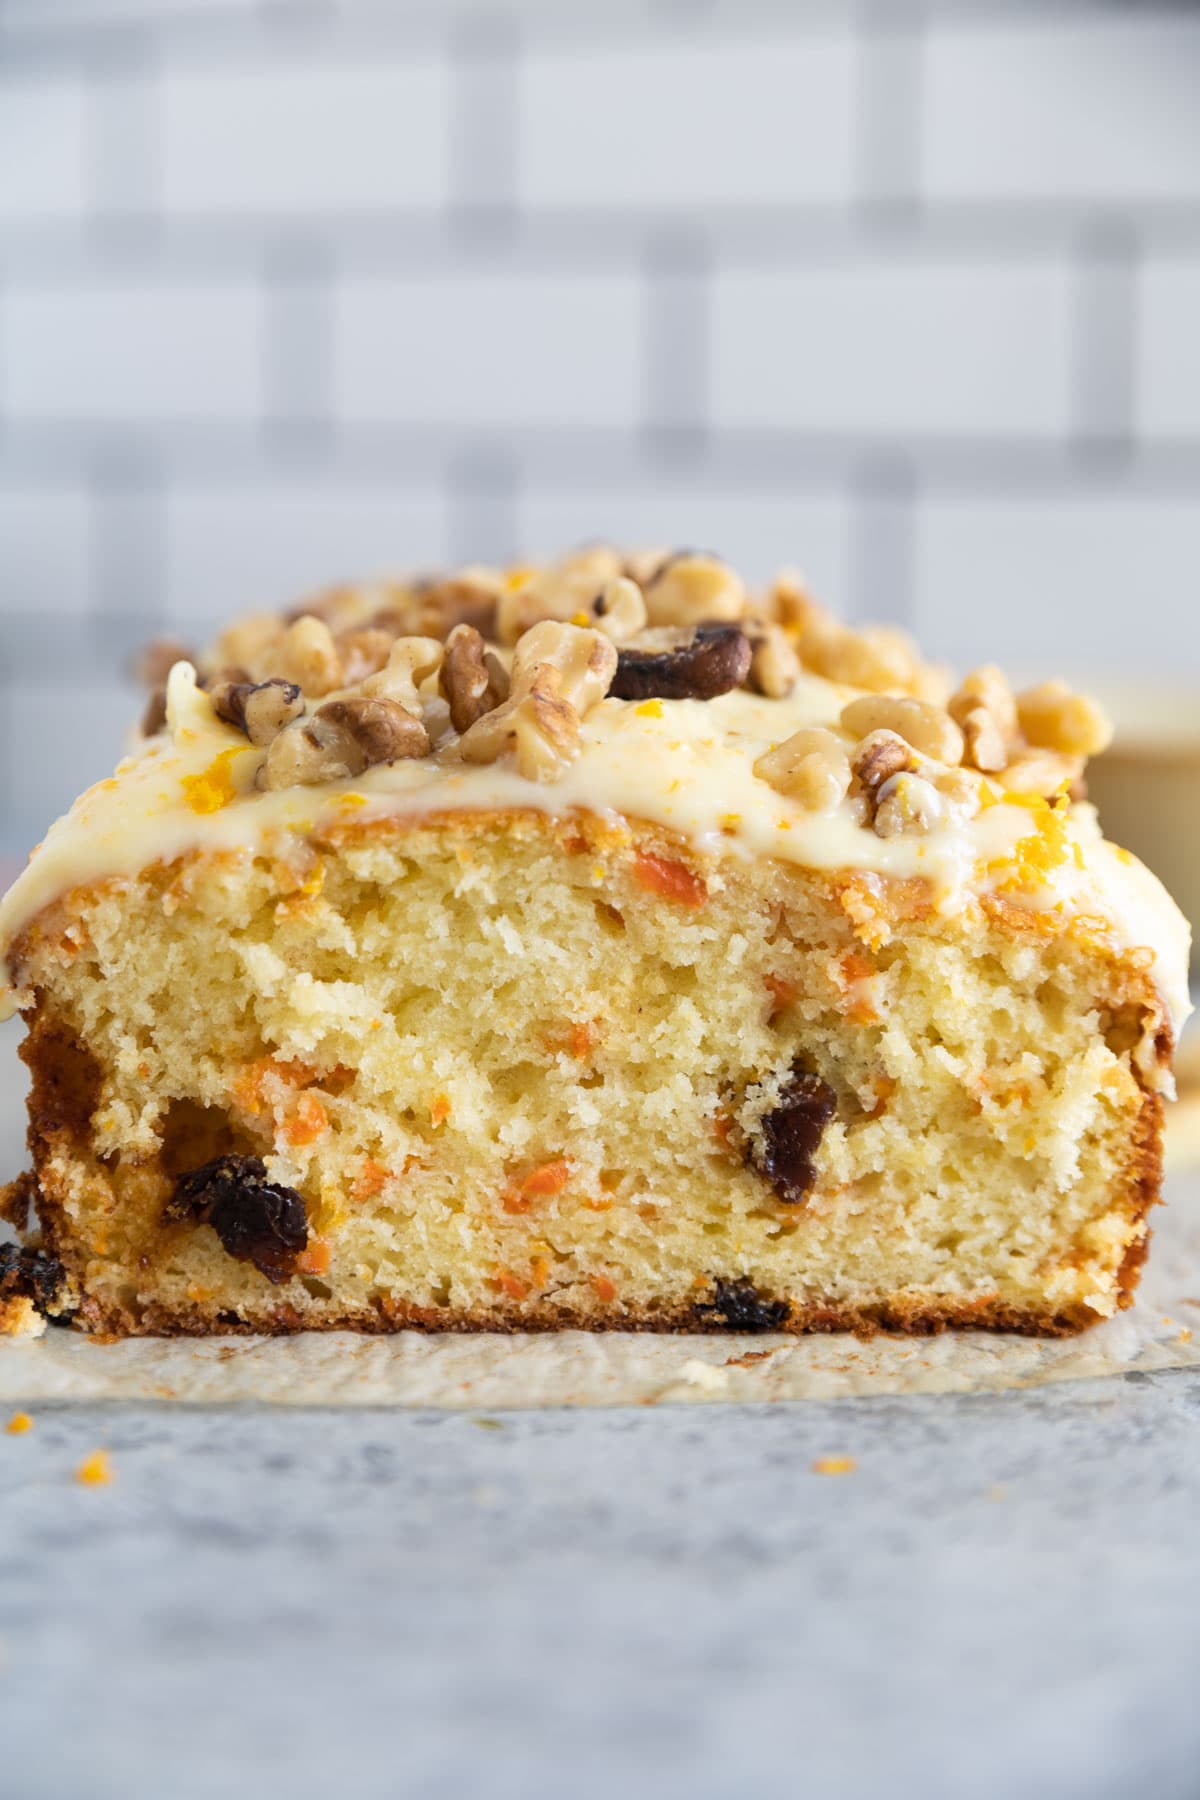 carrot cake bread with walnuts on top and orange zest. The bread is cut so the insides are showing